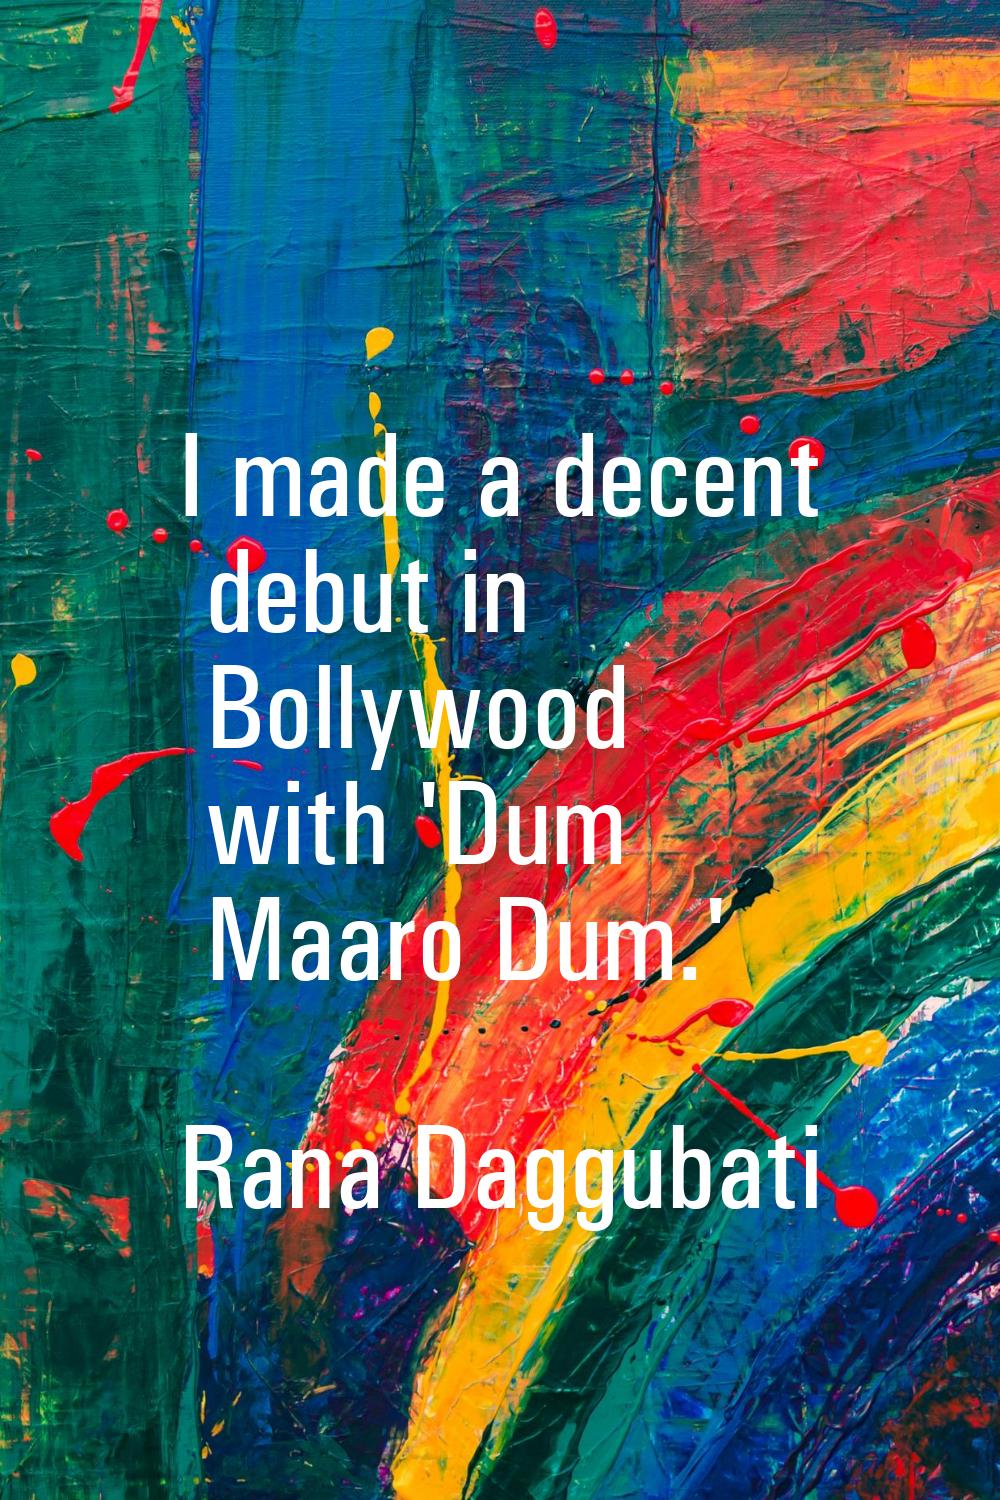 I made a decent debut in Bollywood with 'Dum Maaro Dum.'